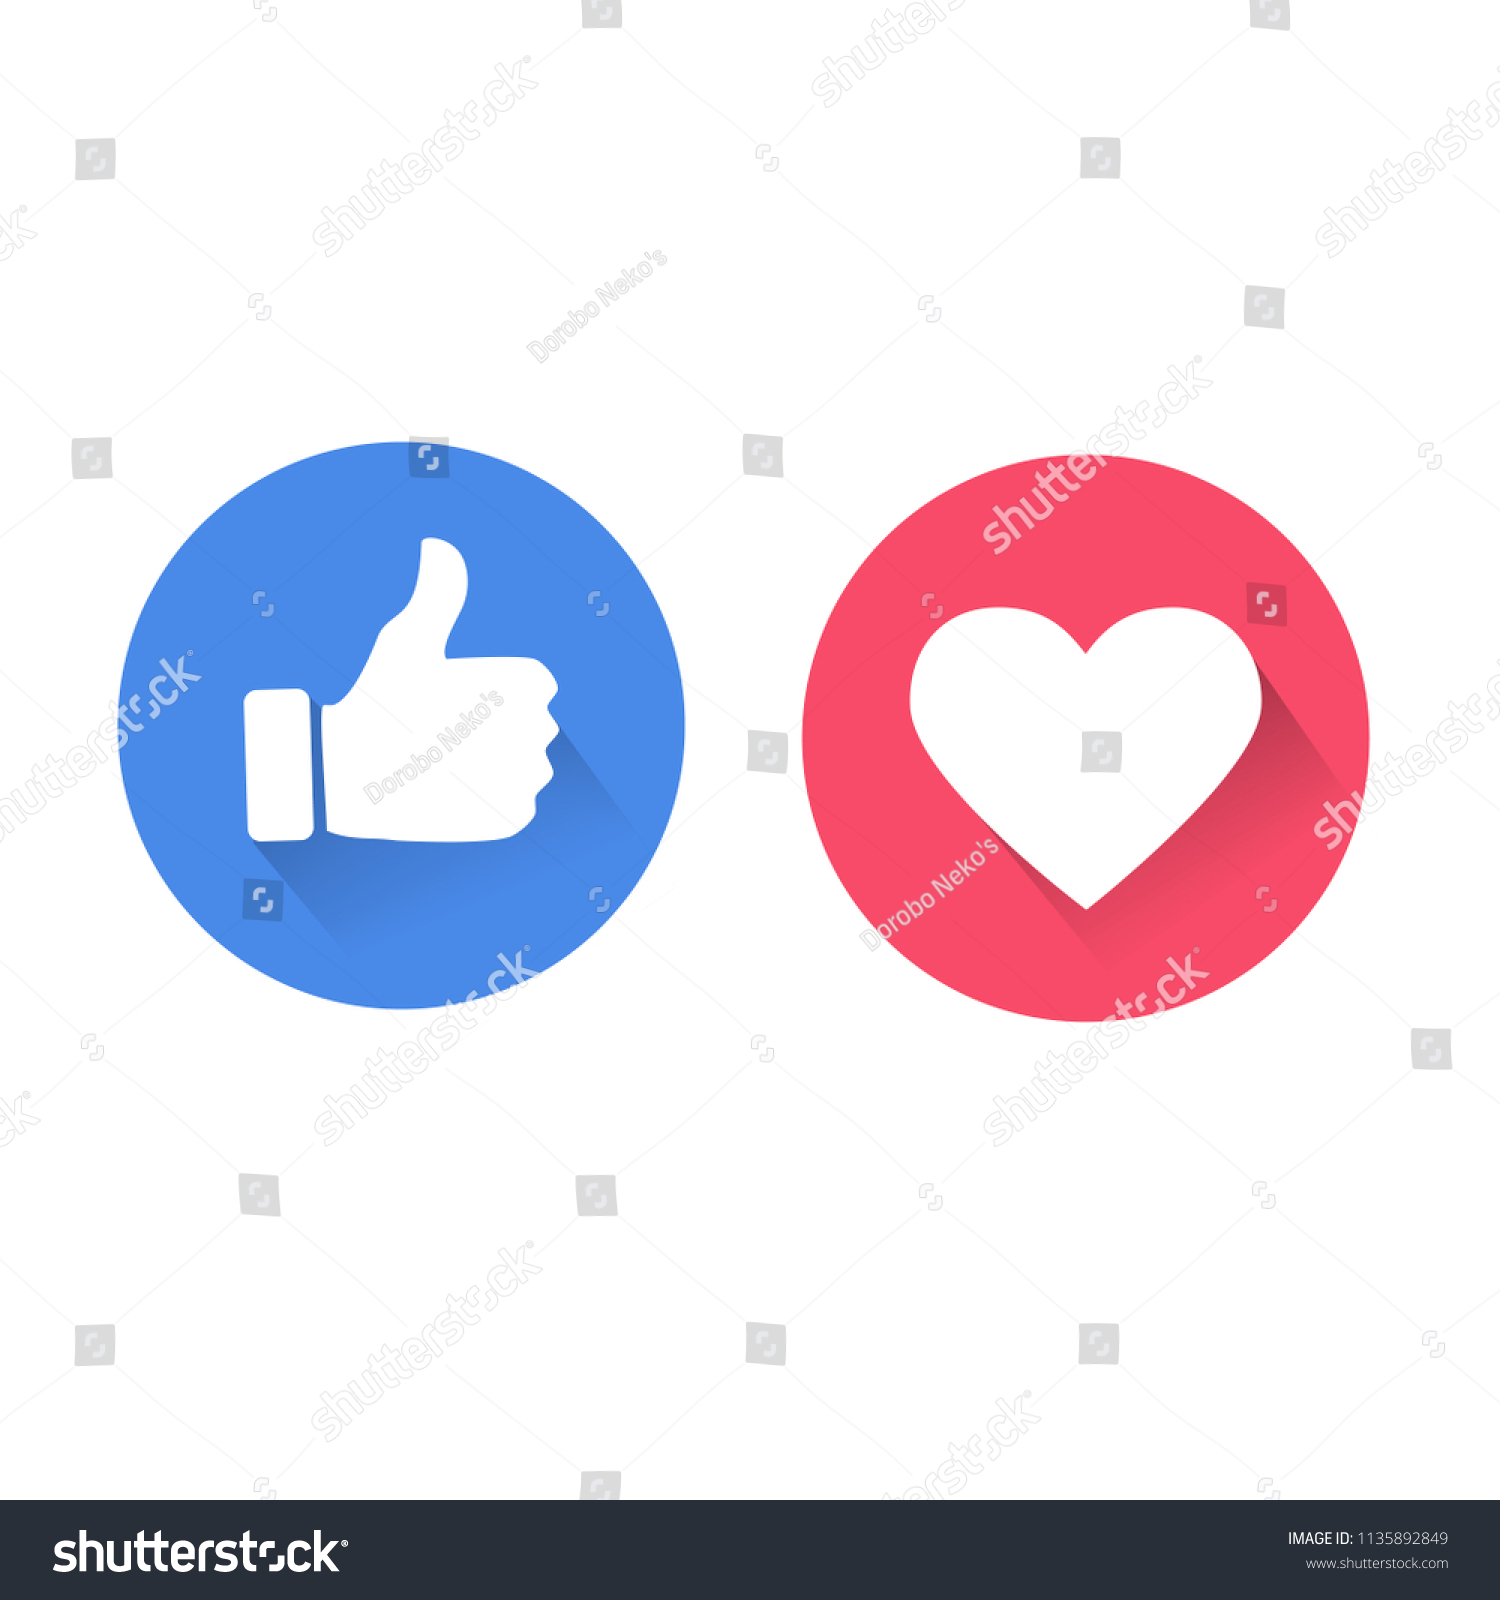 SVG of Thumbs up and heart icon. social media icon, empathetic emoji reactions, with drop shadow vector illustration svg